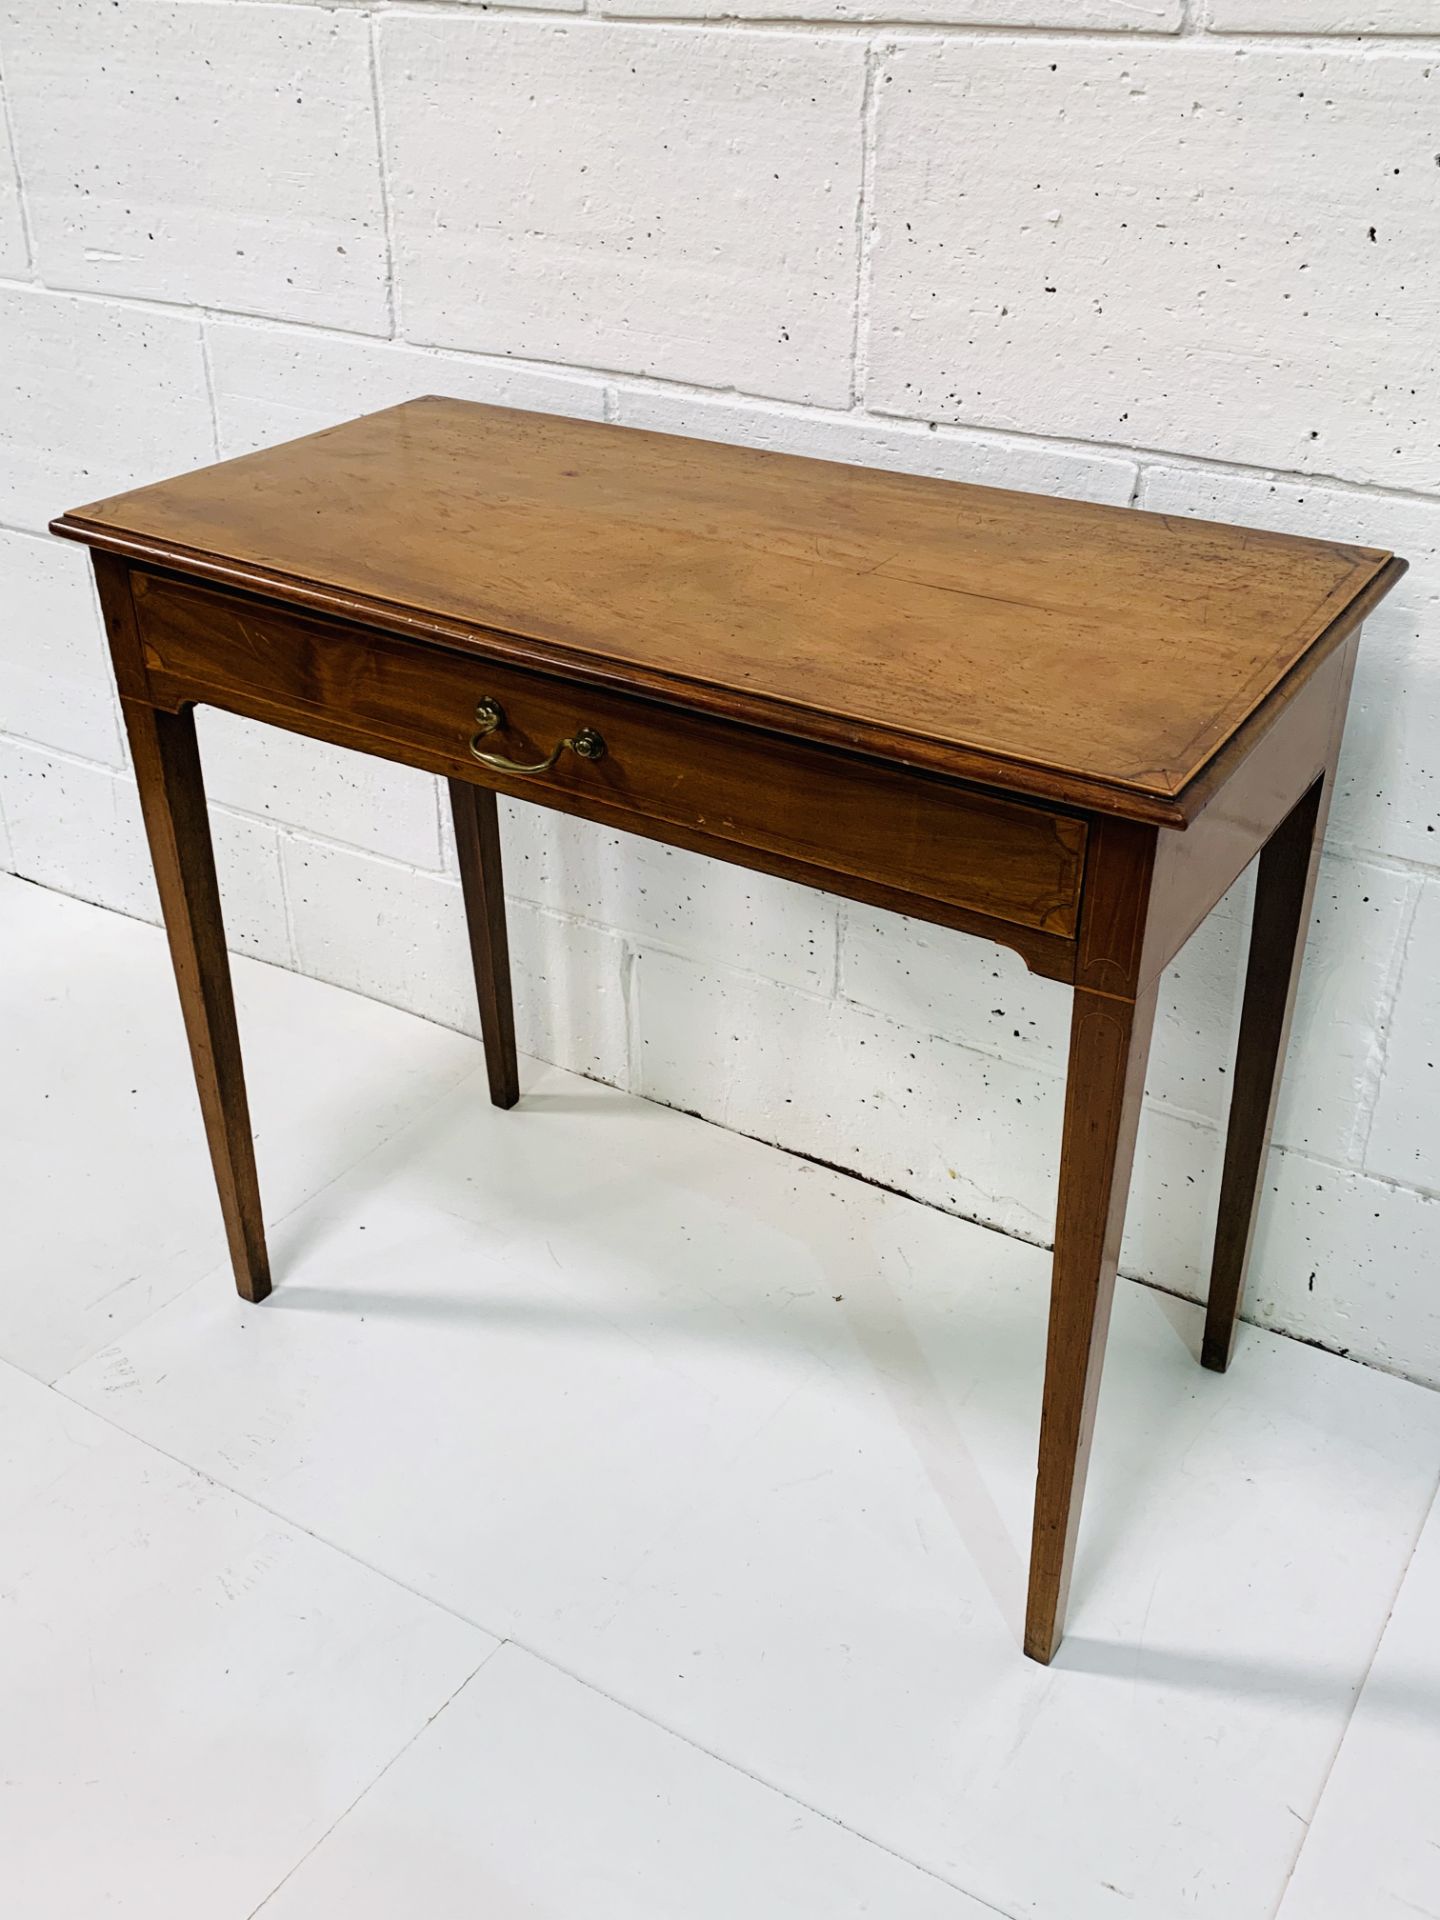 Mahogany small table with shell inlaid, frieze drawer on tapered legs. - Image 5 of 6